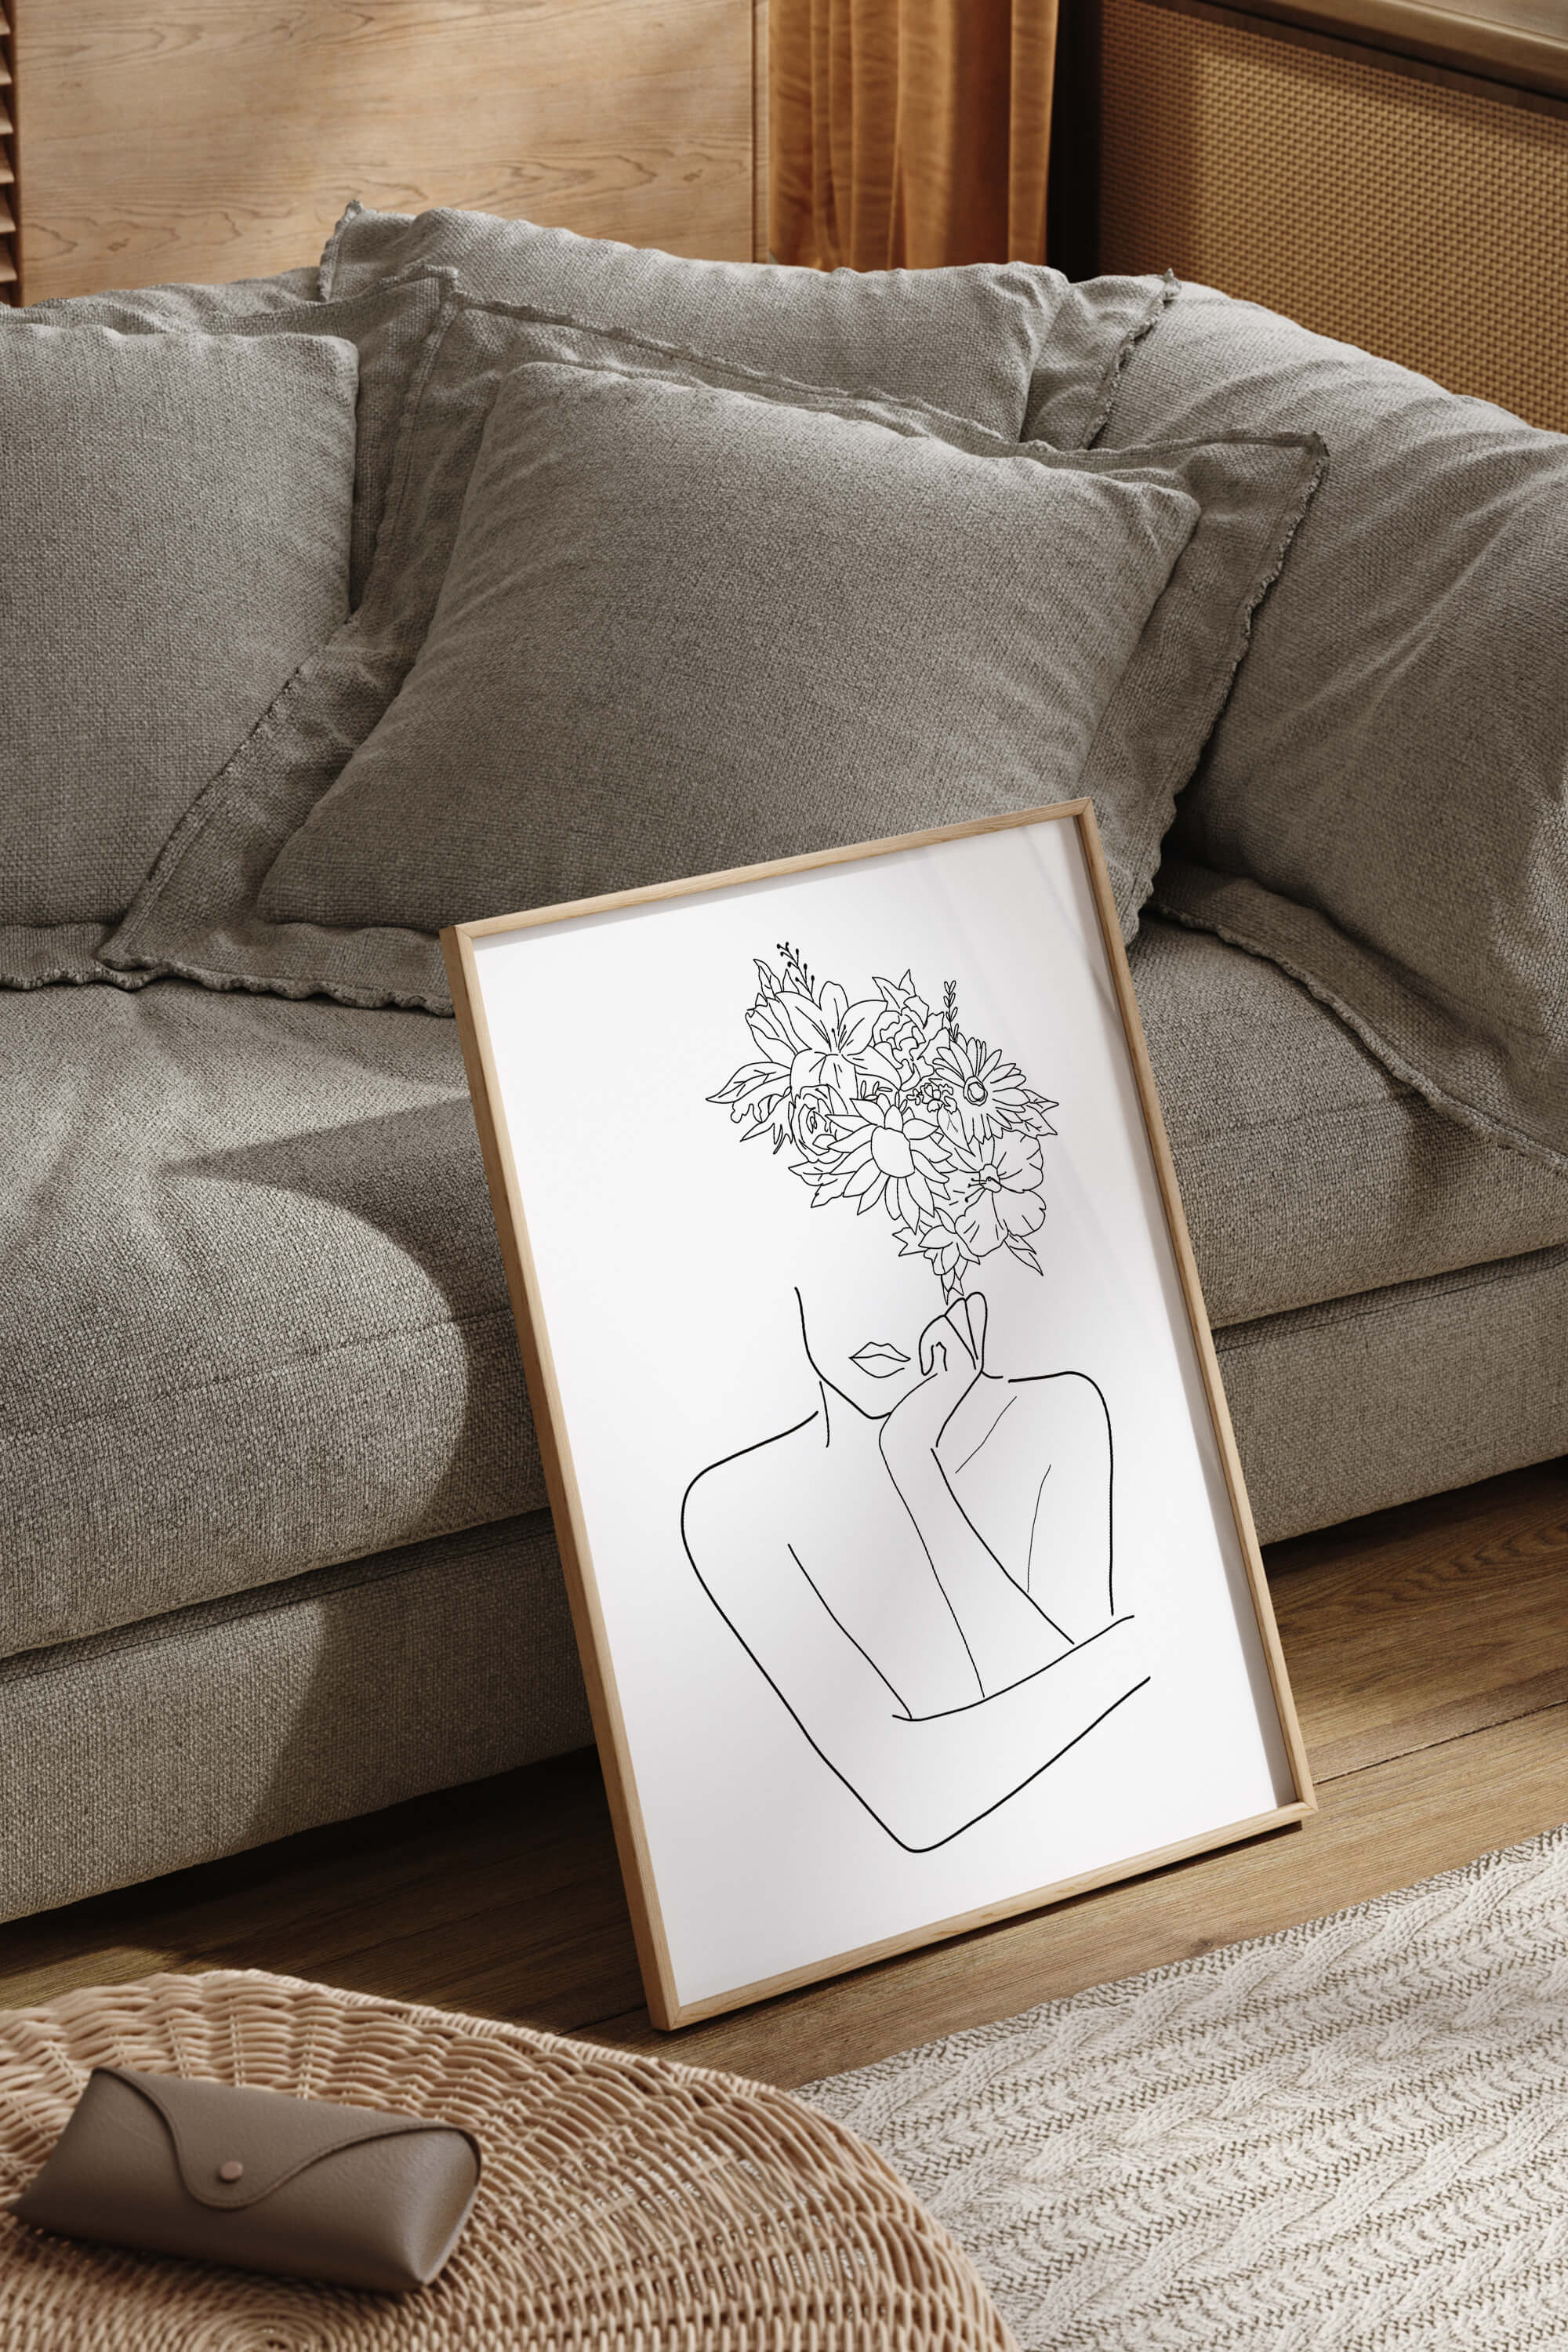 Intricate floral line artwork with a focus on elegance and craftsmanship. This unique art print appeals to refined art lovers, offering an exclusive addition to any collection with its delicate and detailed composition.